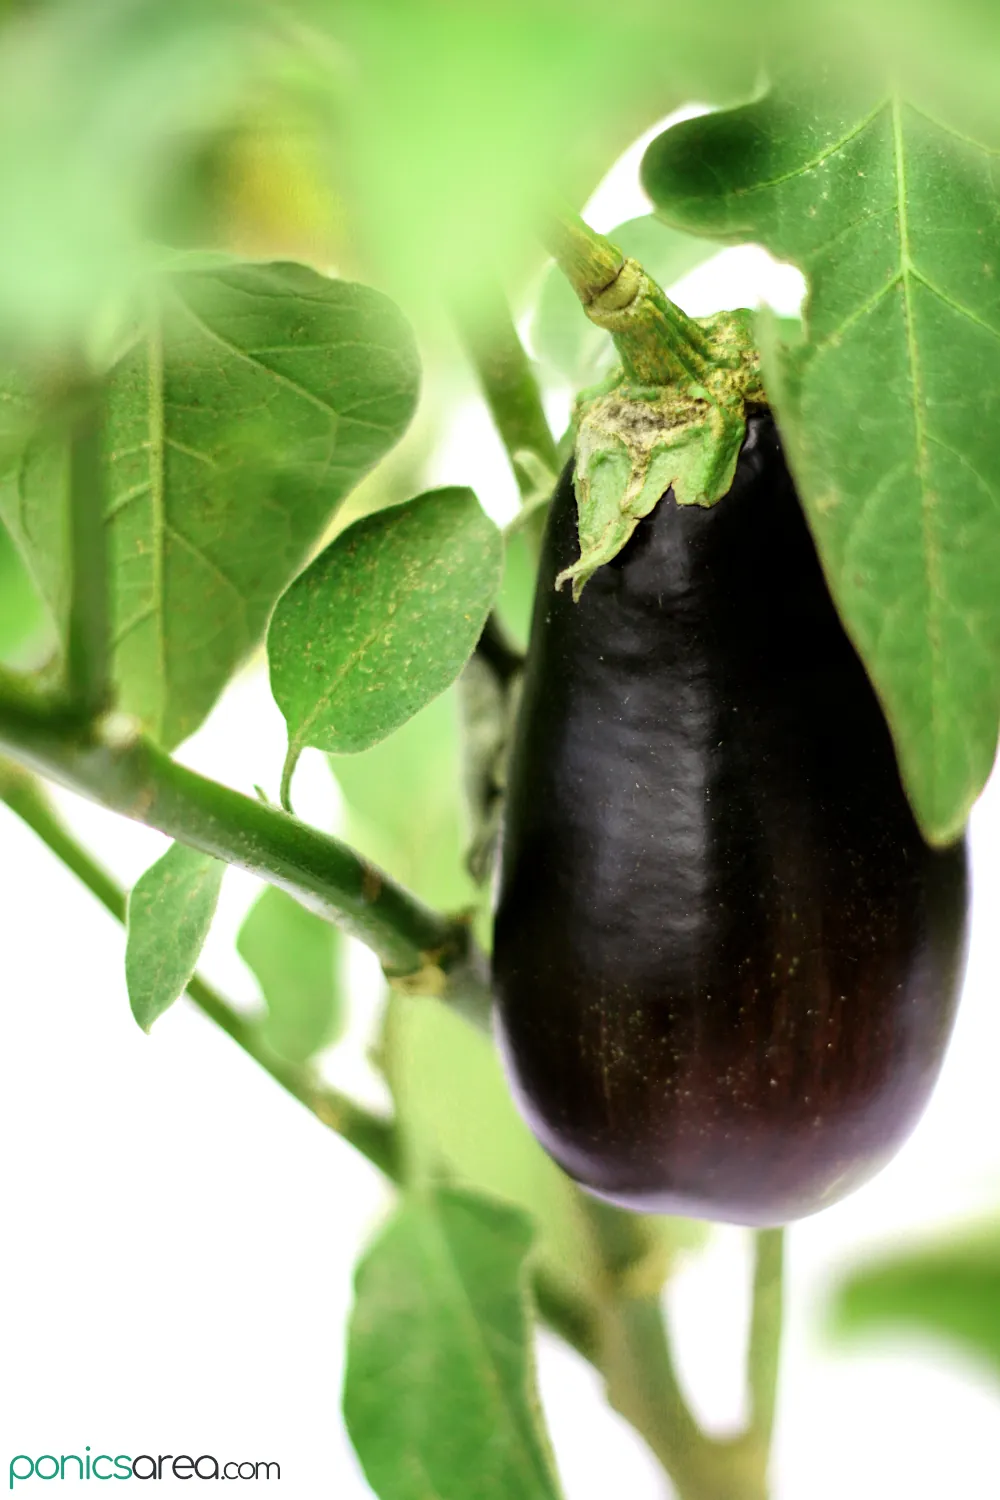 hydroponic systems for aubergine